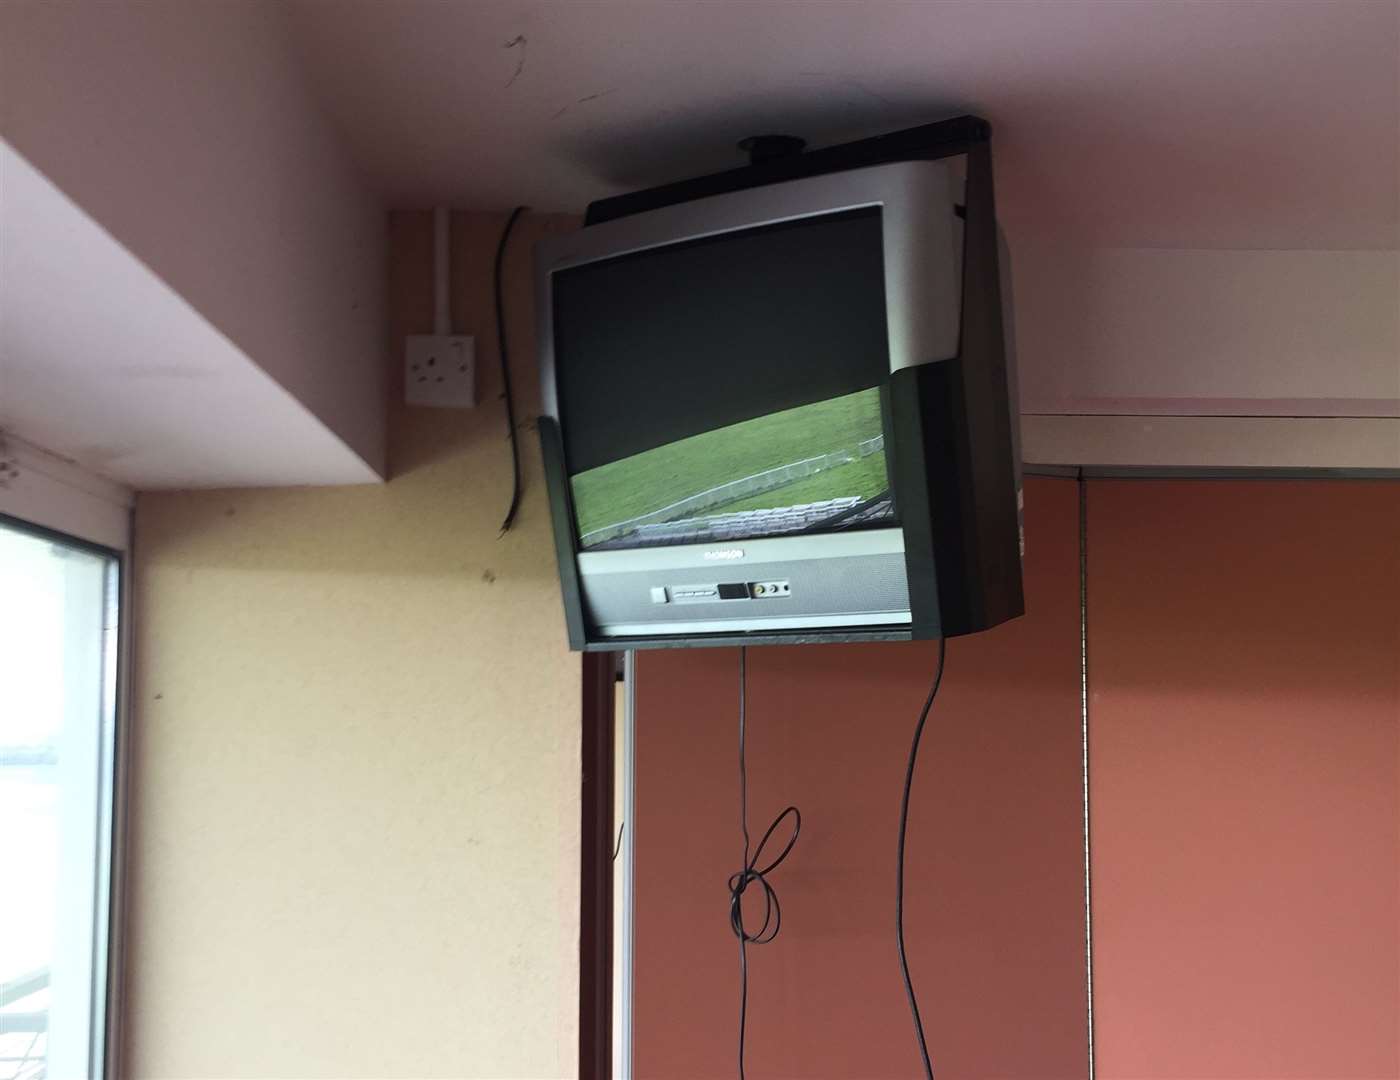 An abandoned TV in a hospitality suite